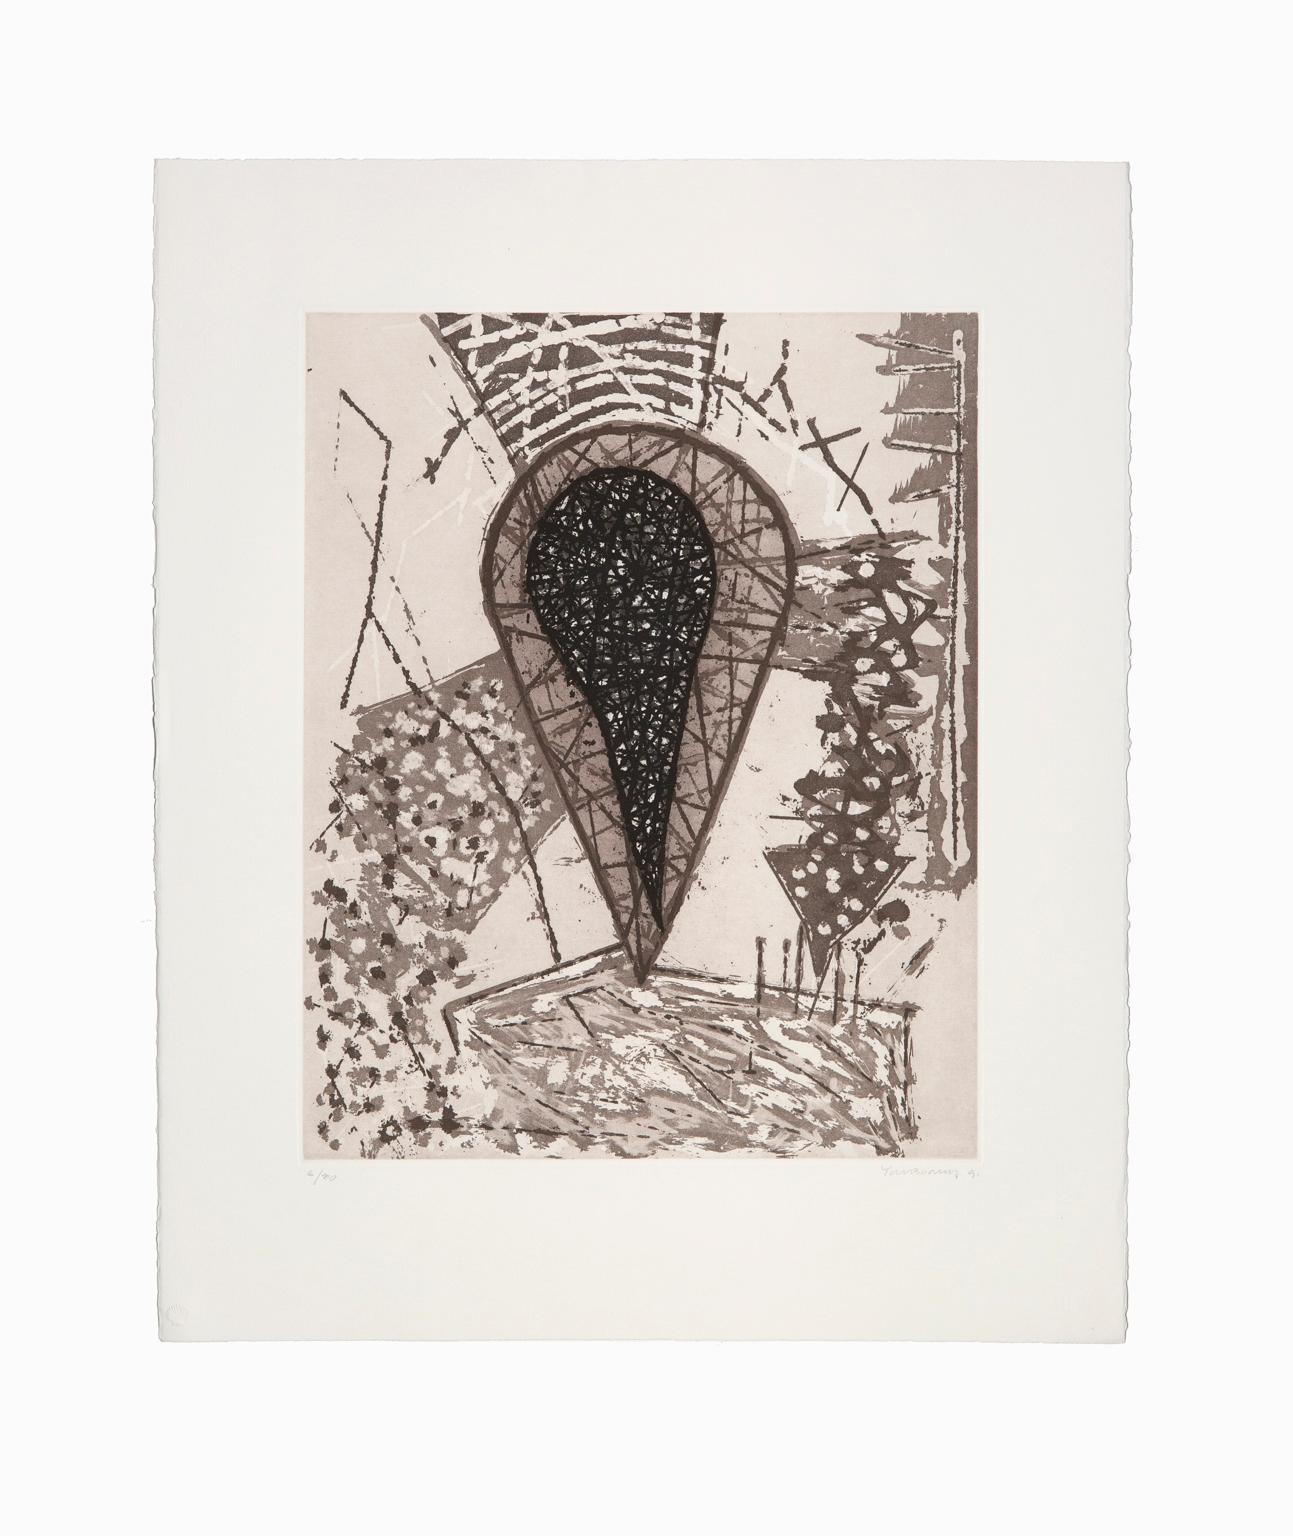 "Untitled II", Abstract Etching and Aquatint Lithograph, Signed and Numbered